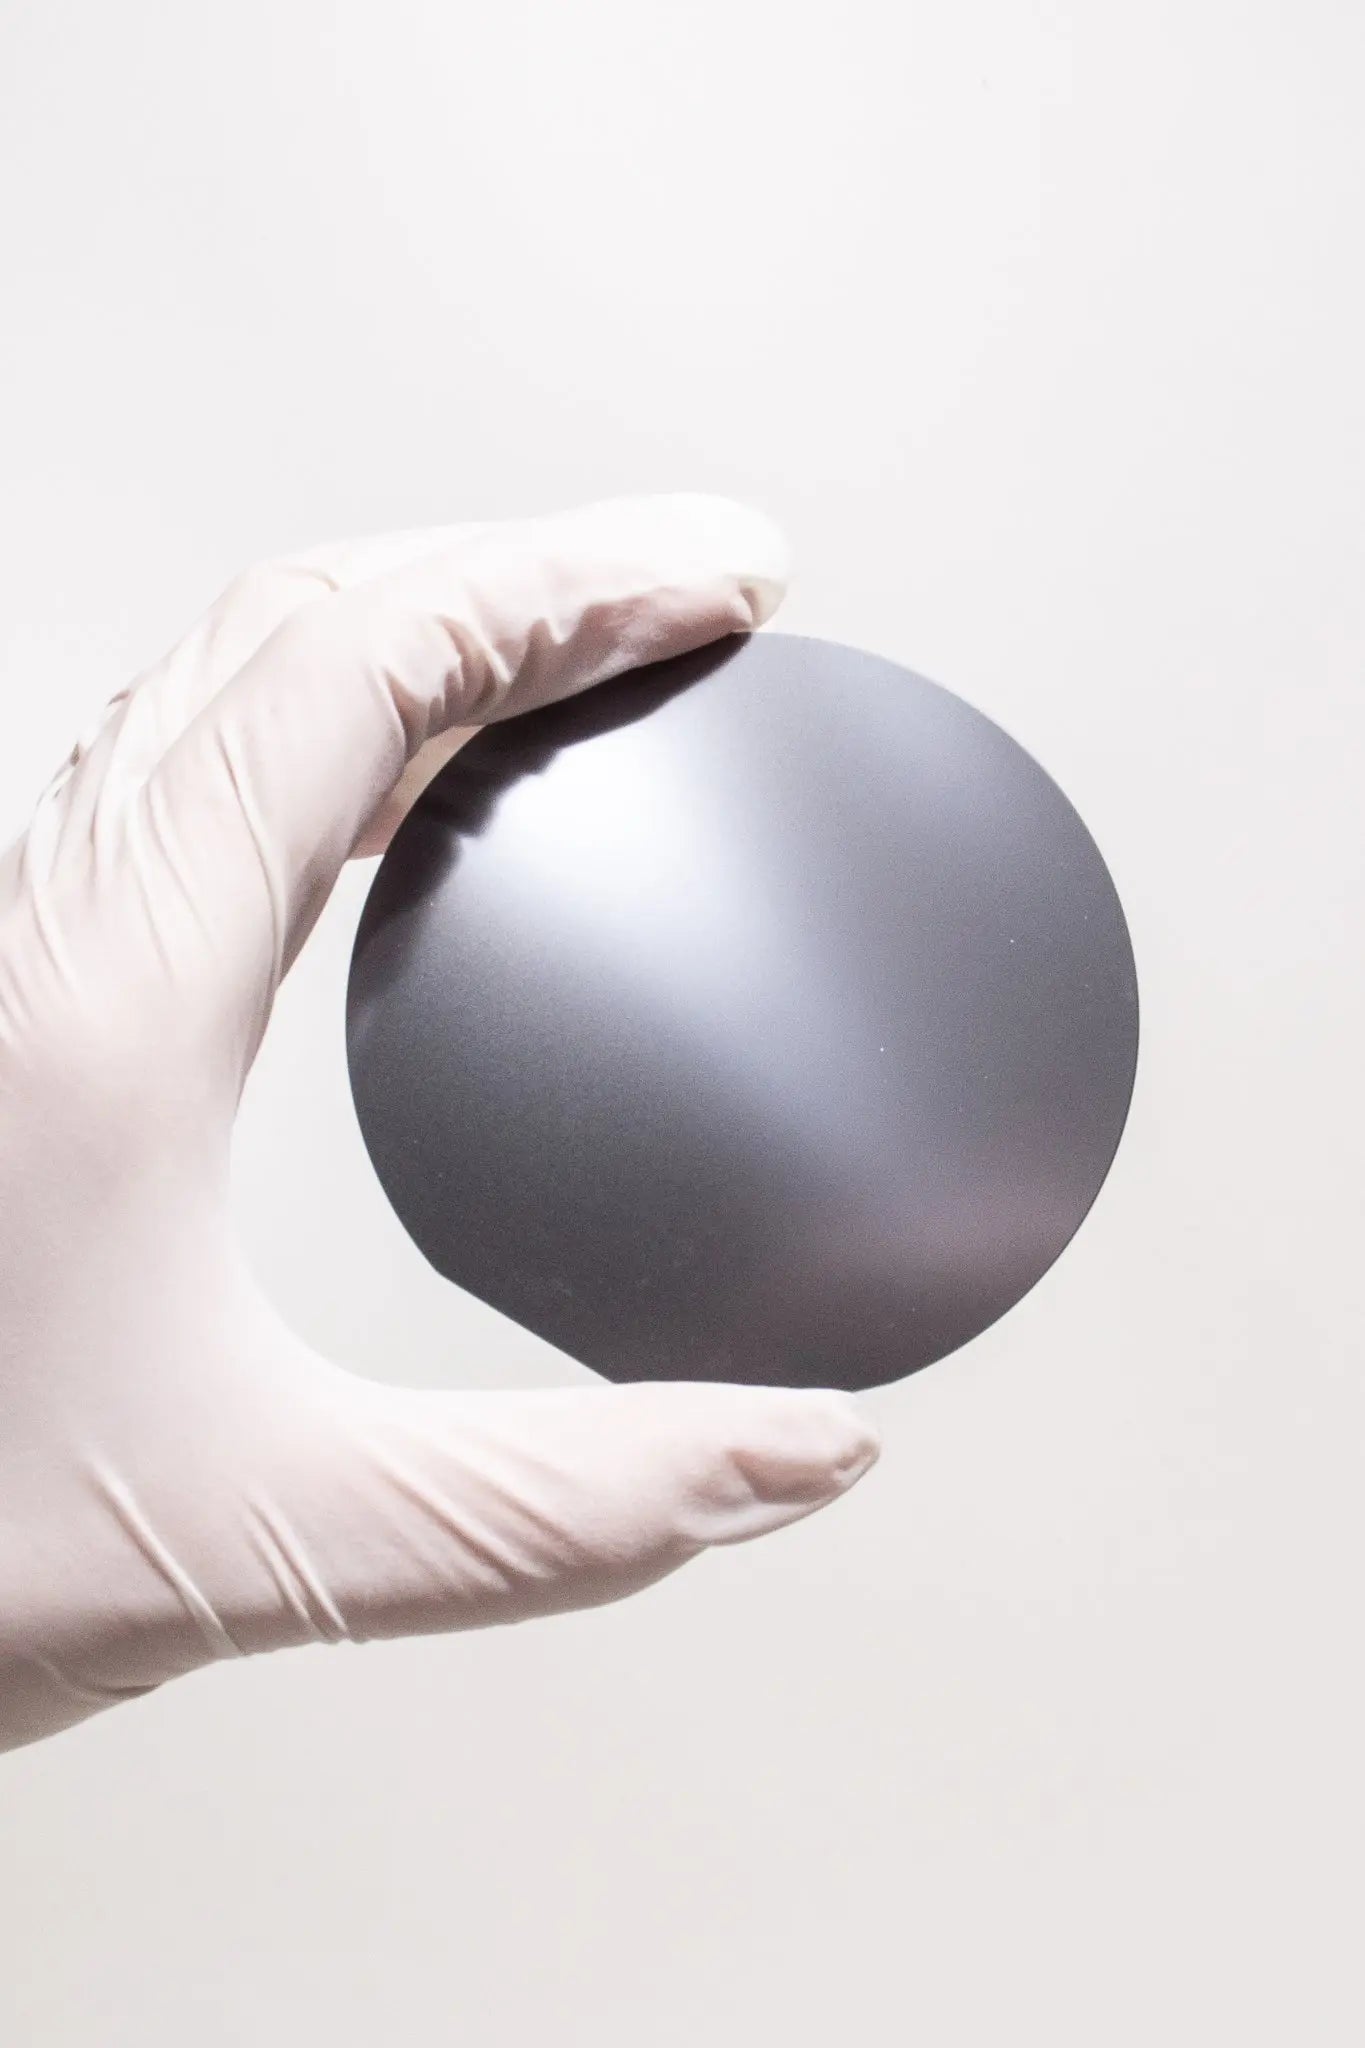 Silicon Wafer - Stemcell Science Shop